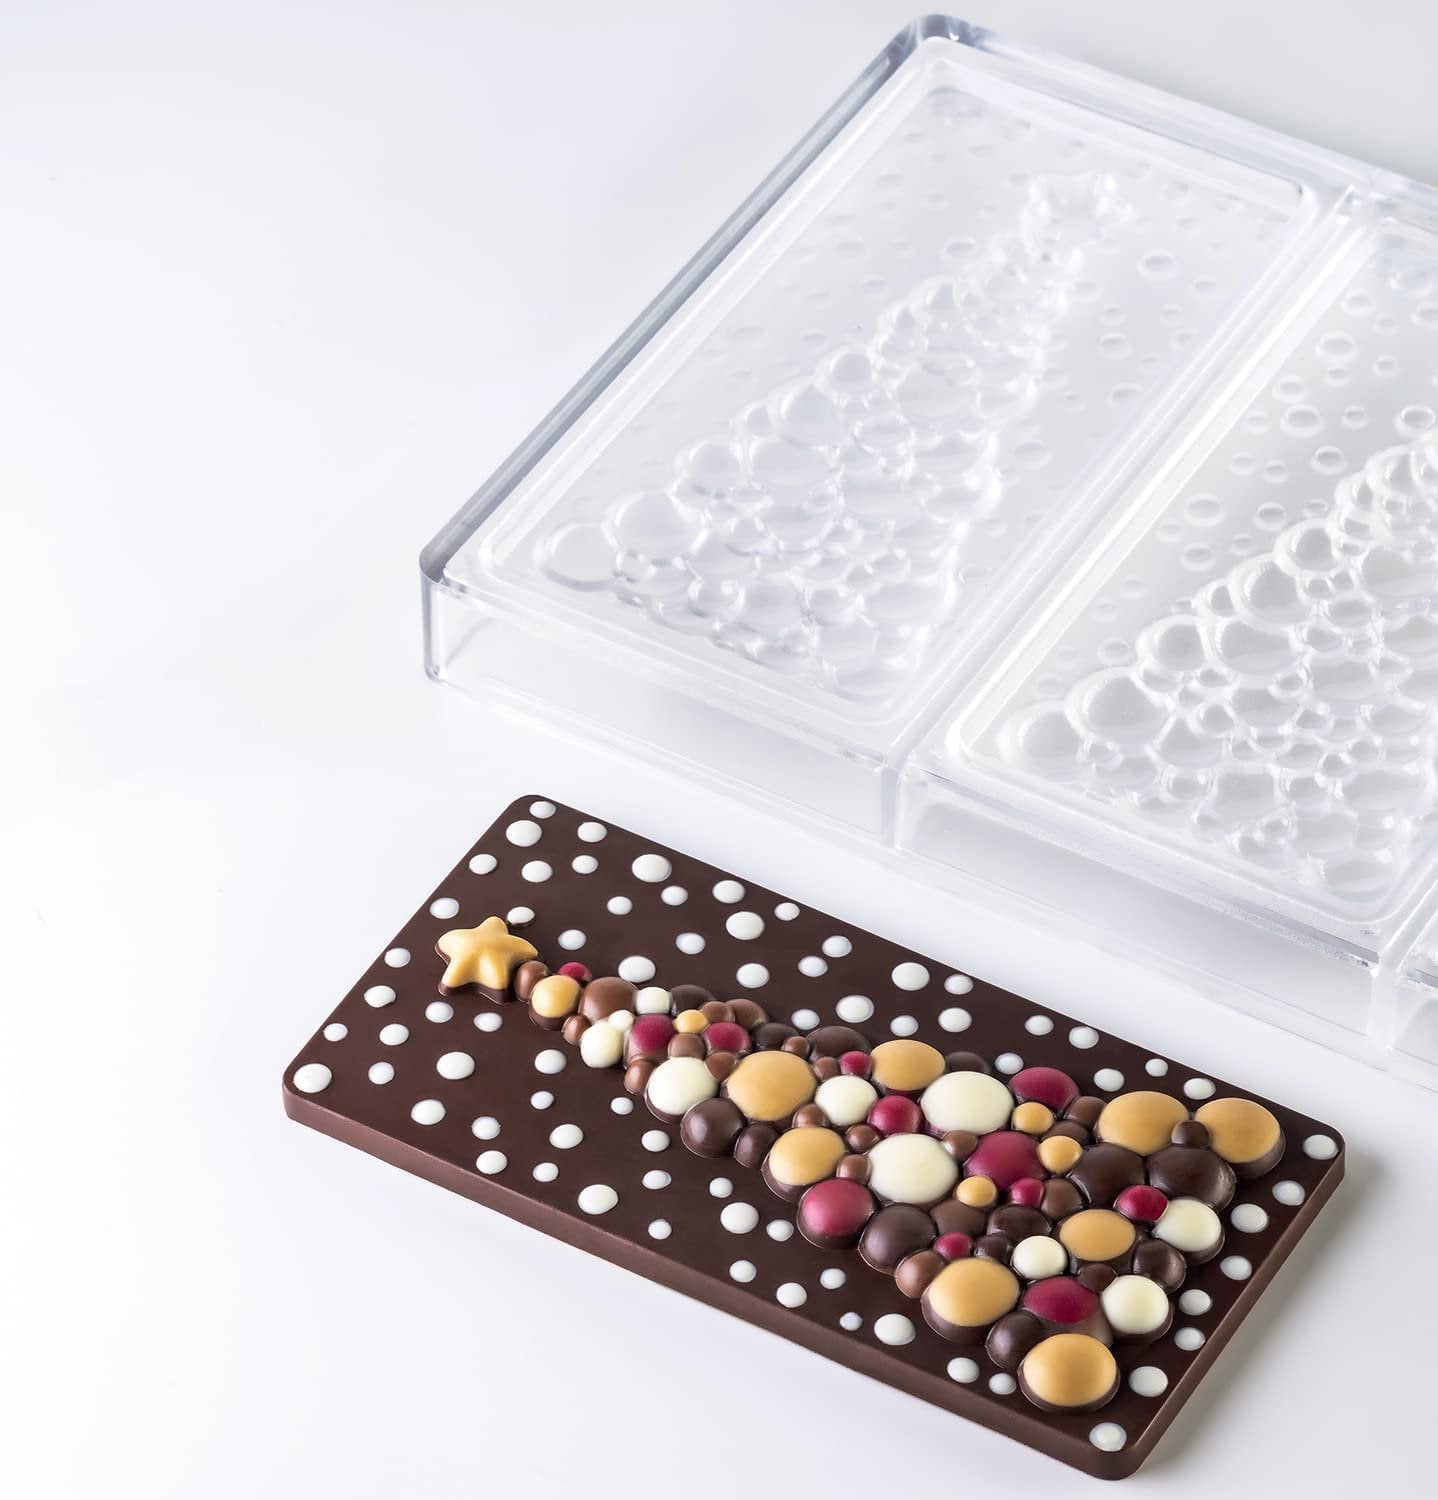 Pavoni Praline 21 Compartment Square Polycarbonate Candy Mold PC47FR - 1  1/16 x 1 1/16 x 1/2 Cavities